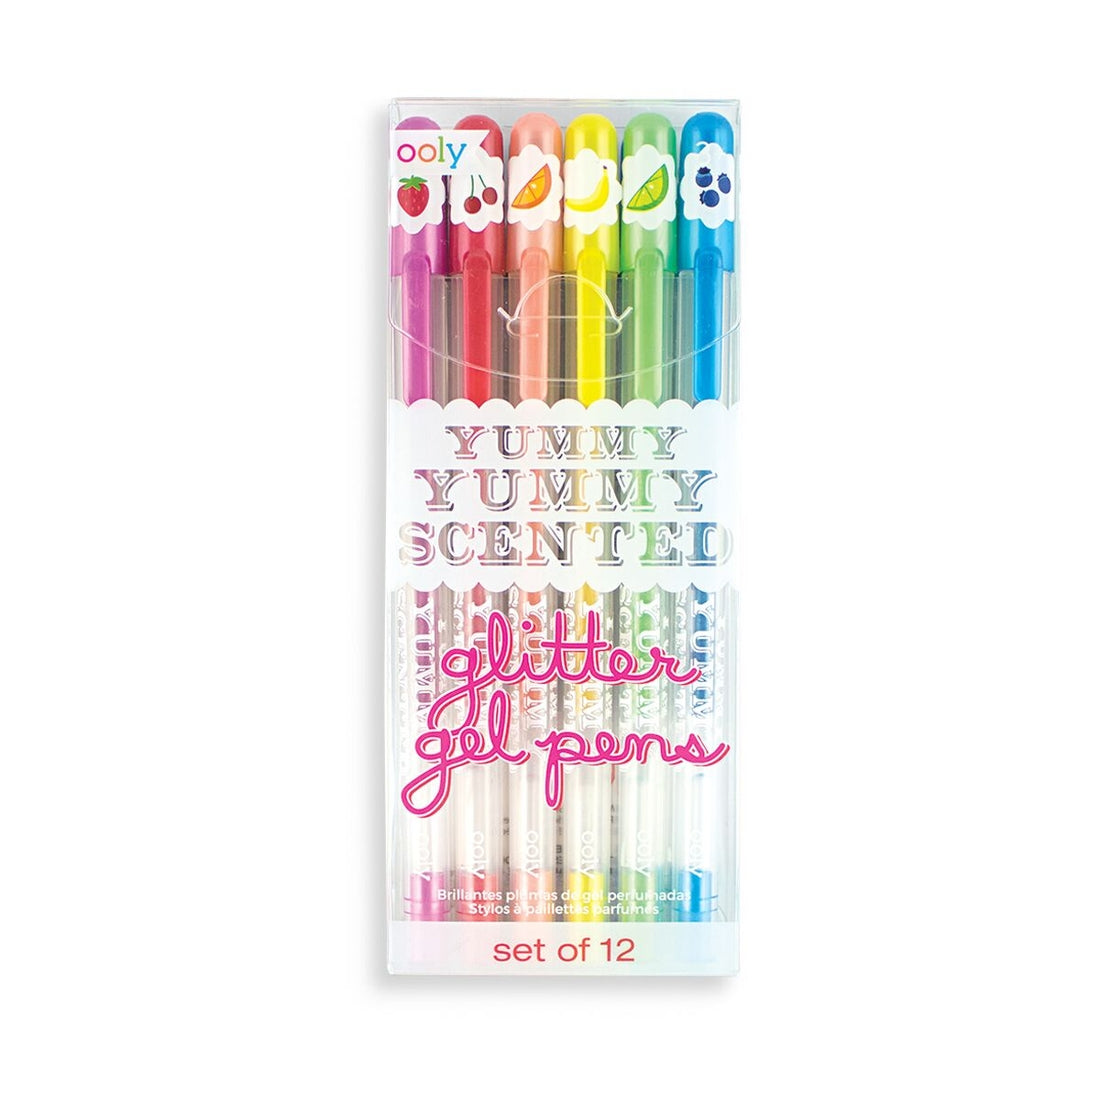 Yummy Scented Gel Pens 196 TOYS CHILD Ooly 